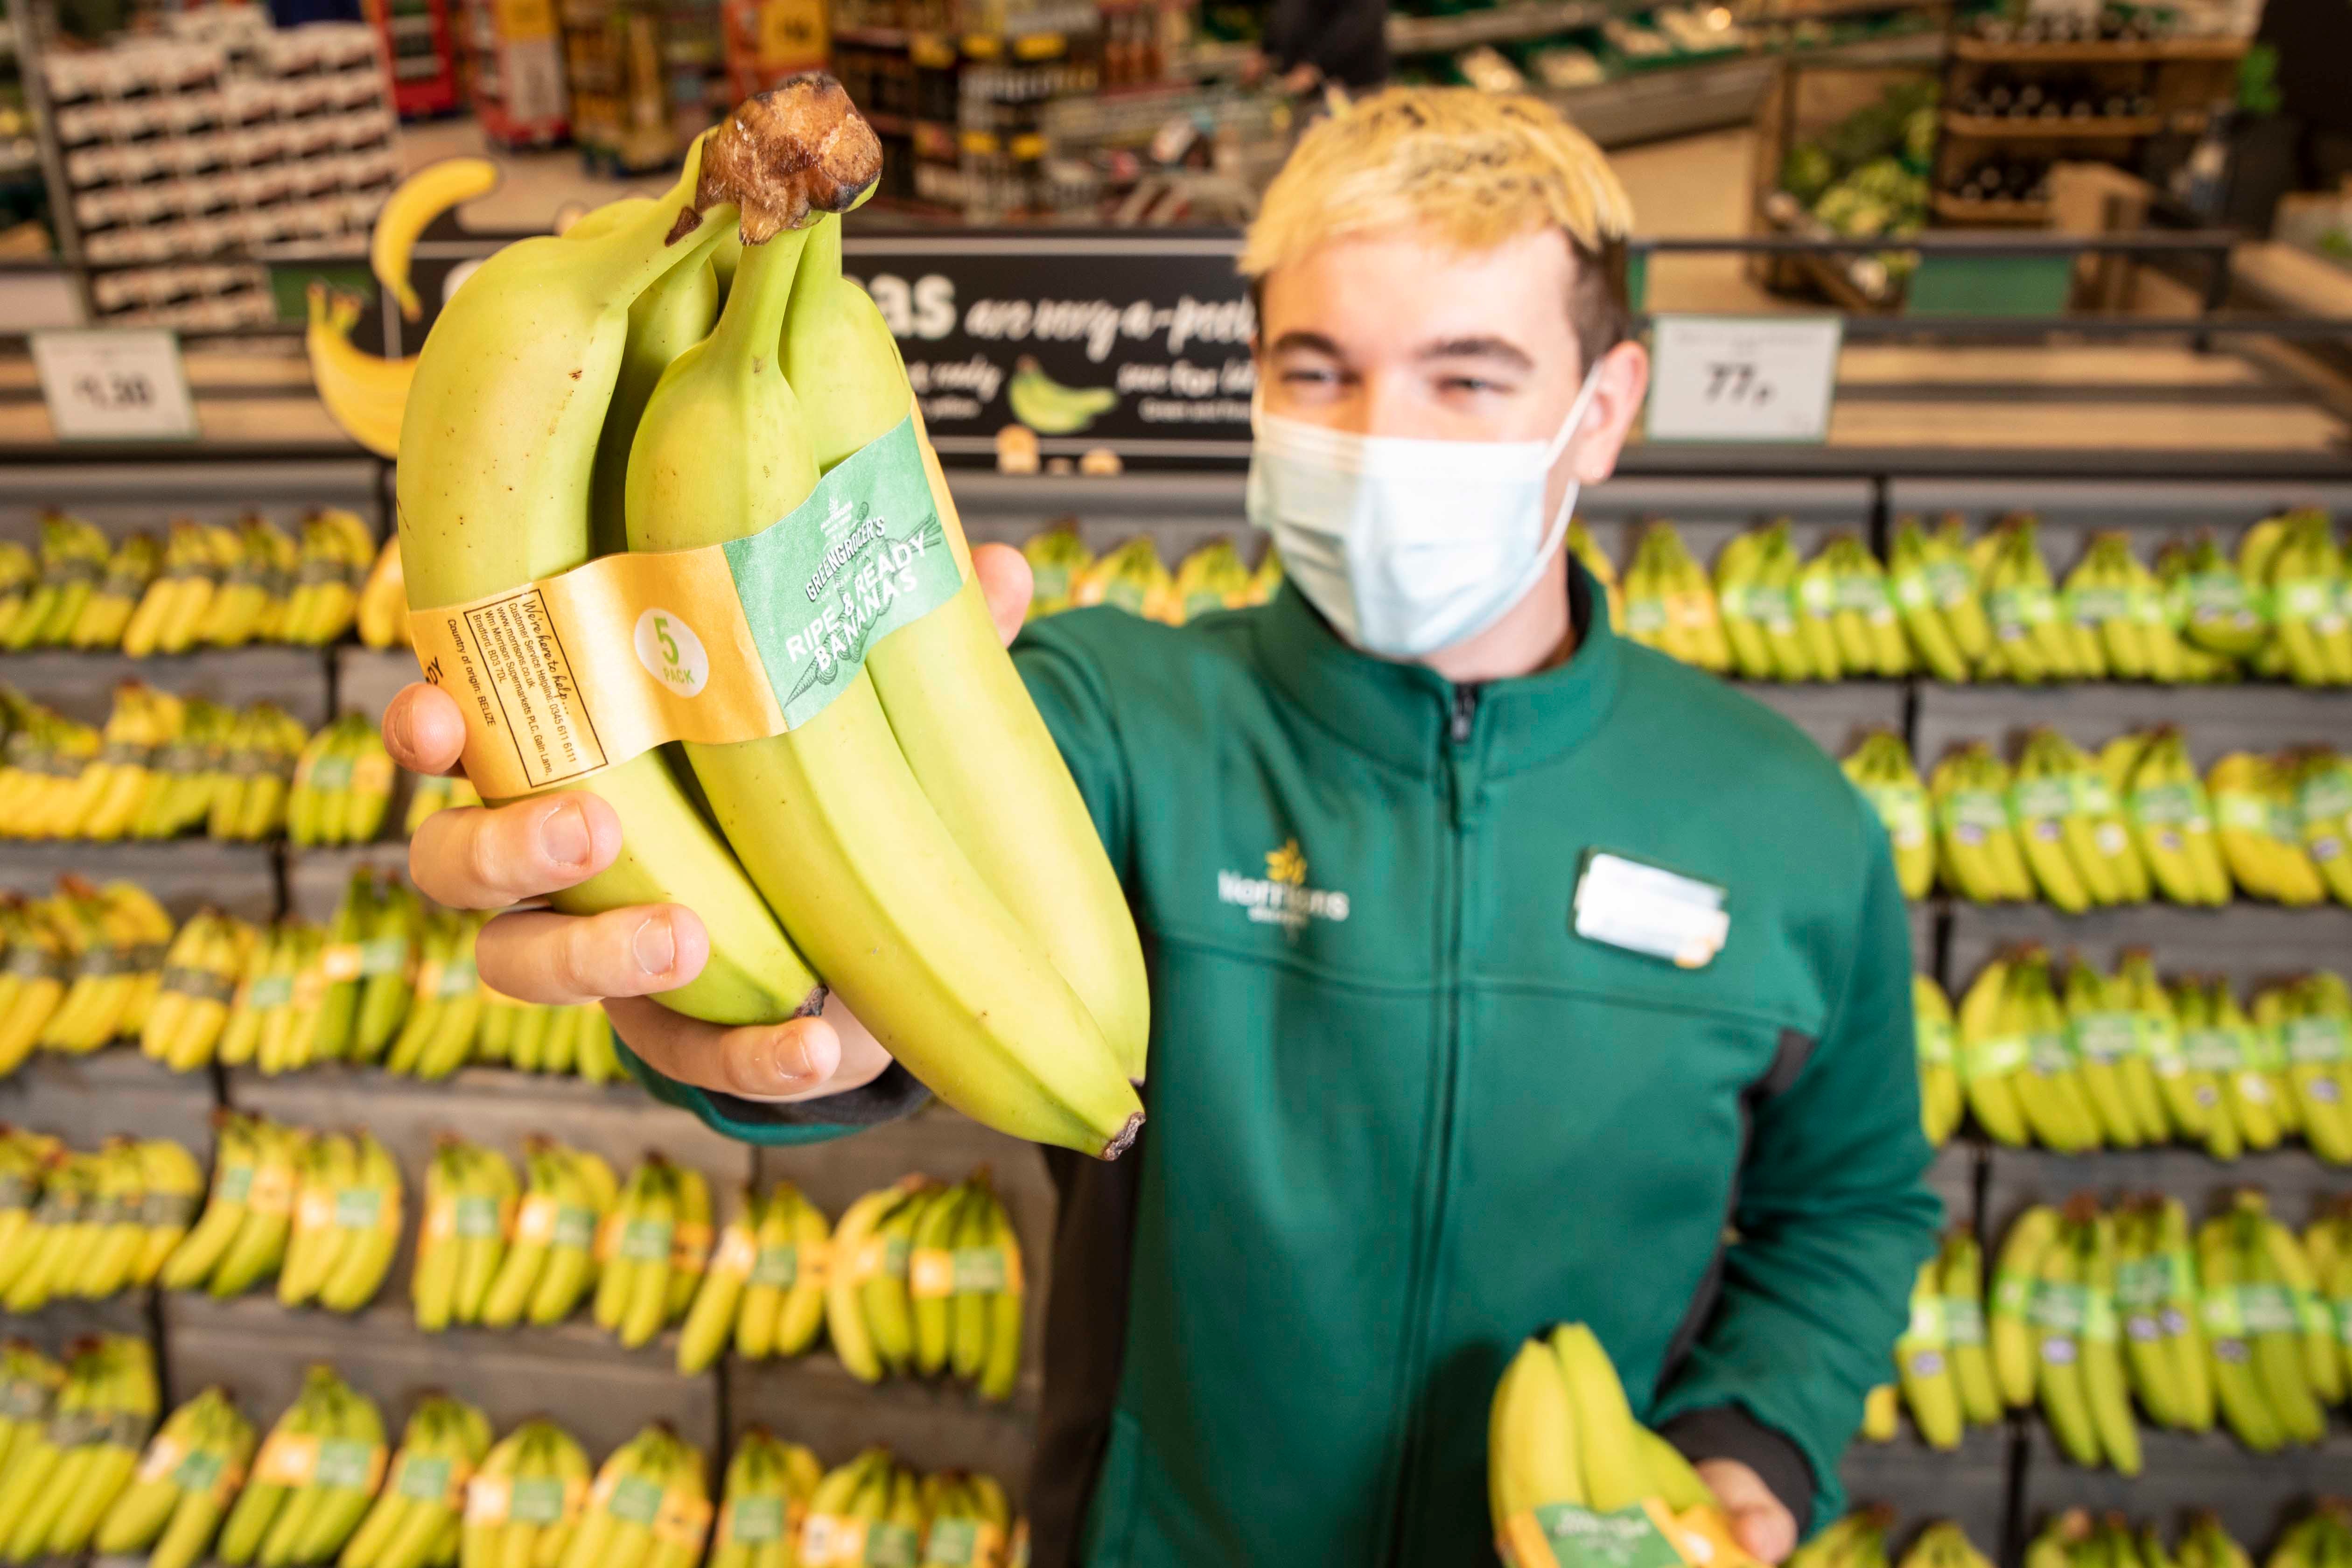 Morrisons has banned plastic packaging from its bananas (Morrisons/PA)